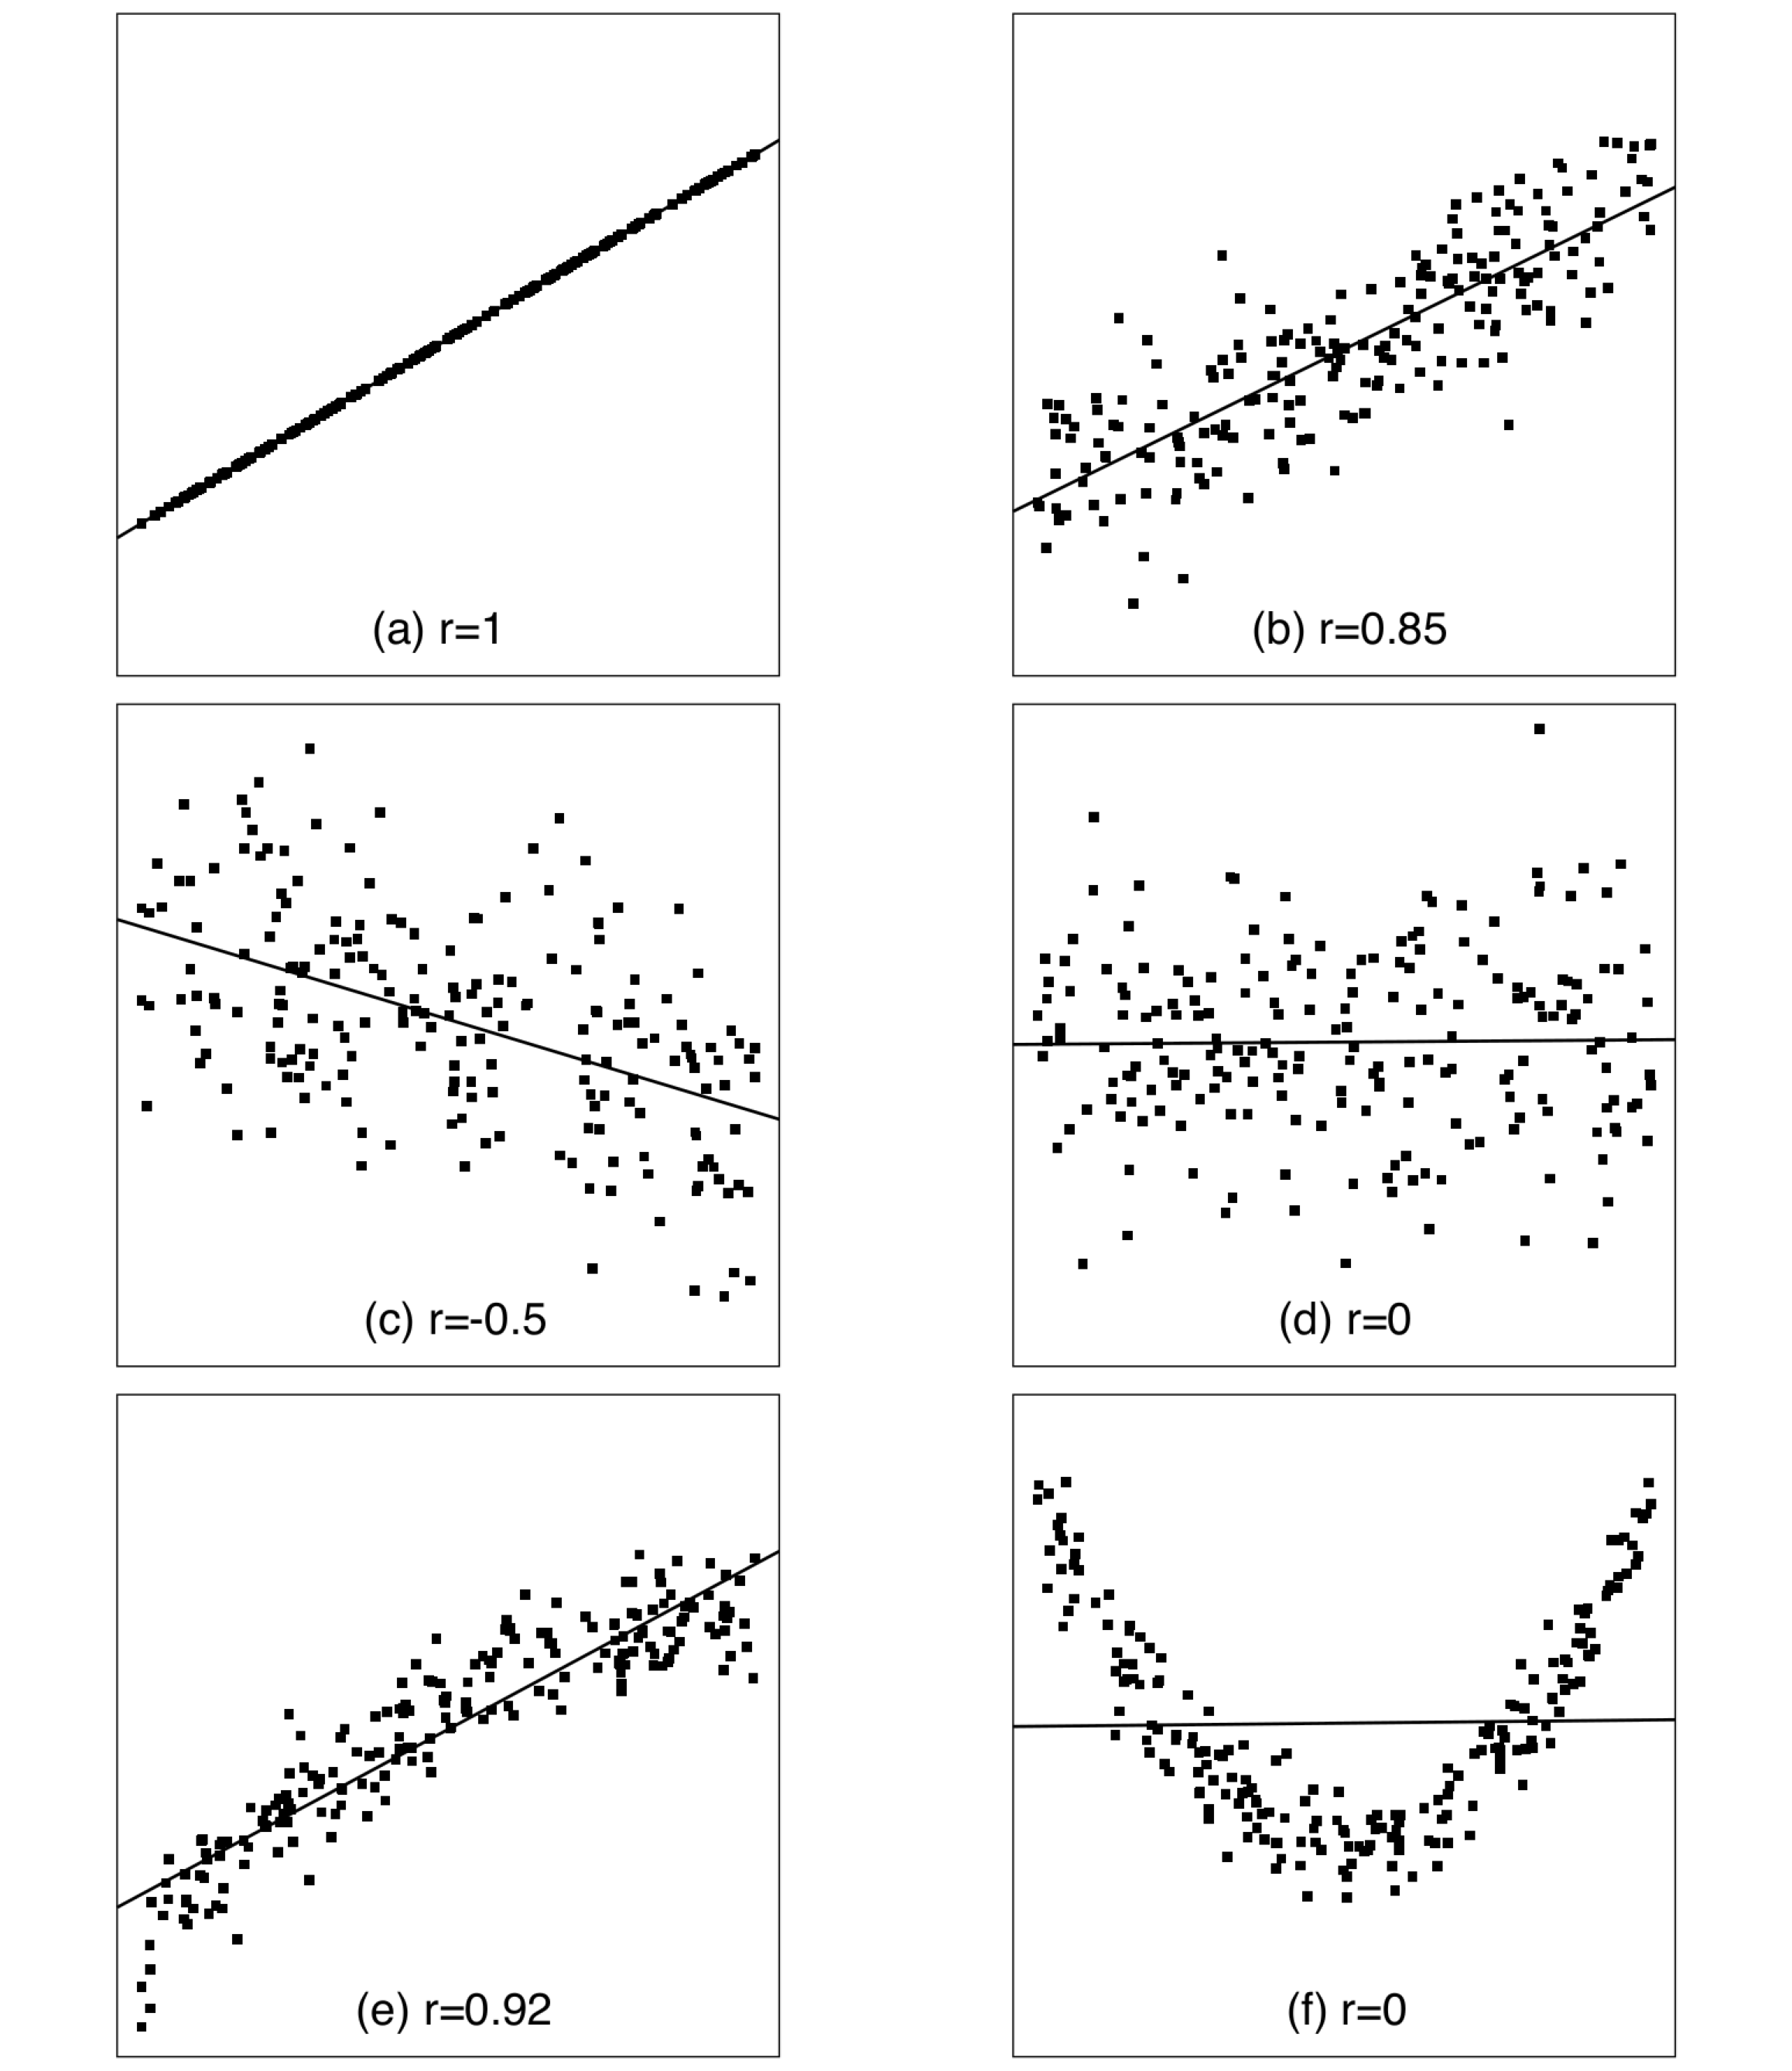 Scatterplots of artificial data sets of two variables. Each plot also shows the best-fitting (least squares) straight line and the correlation coefficient r.